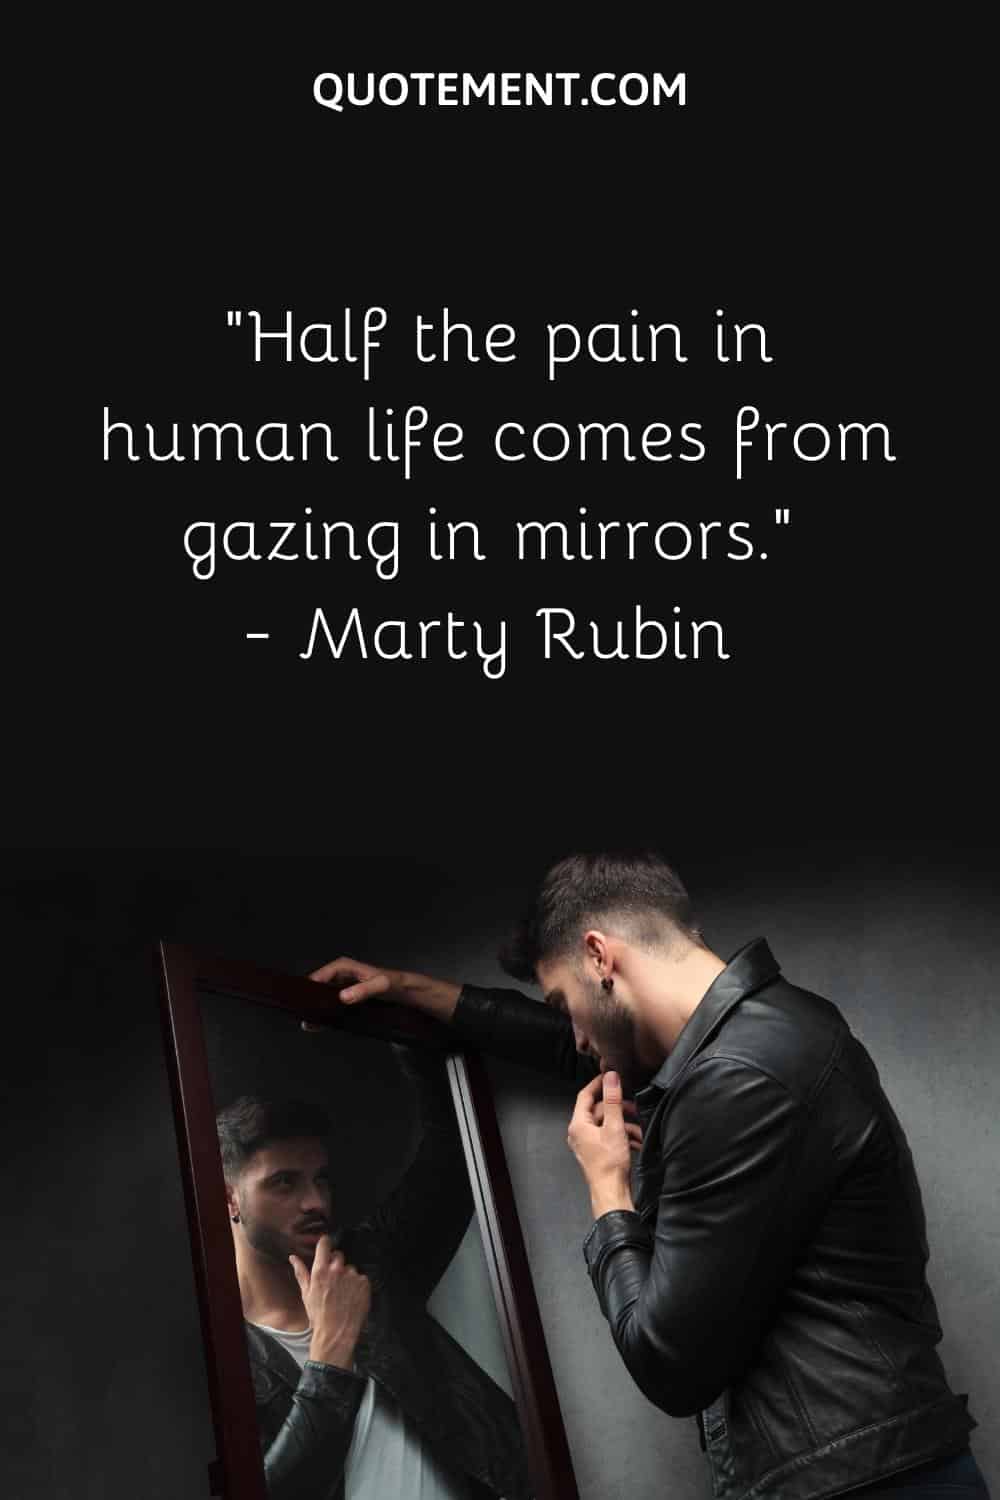 Half the pain in human life comes from gazing in mirrors